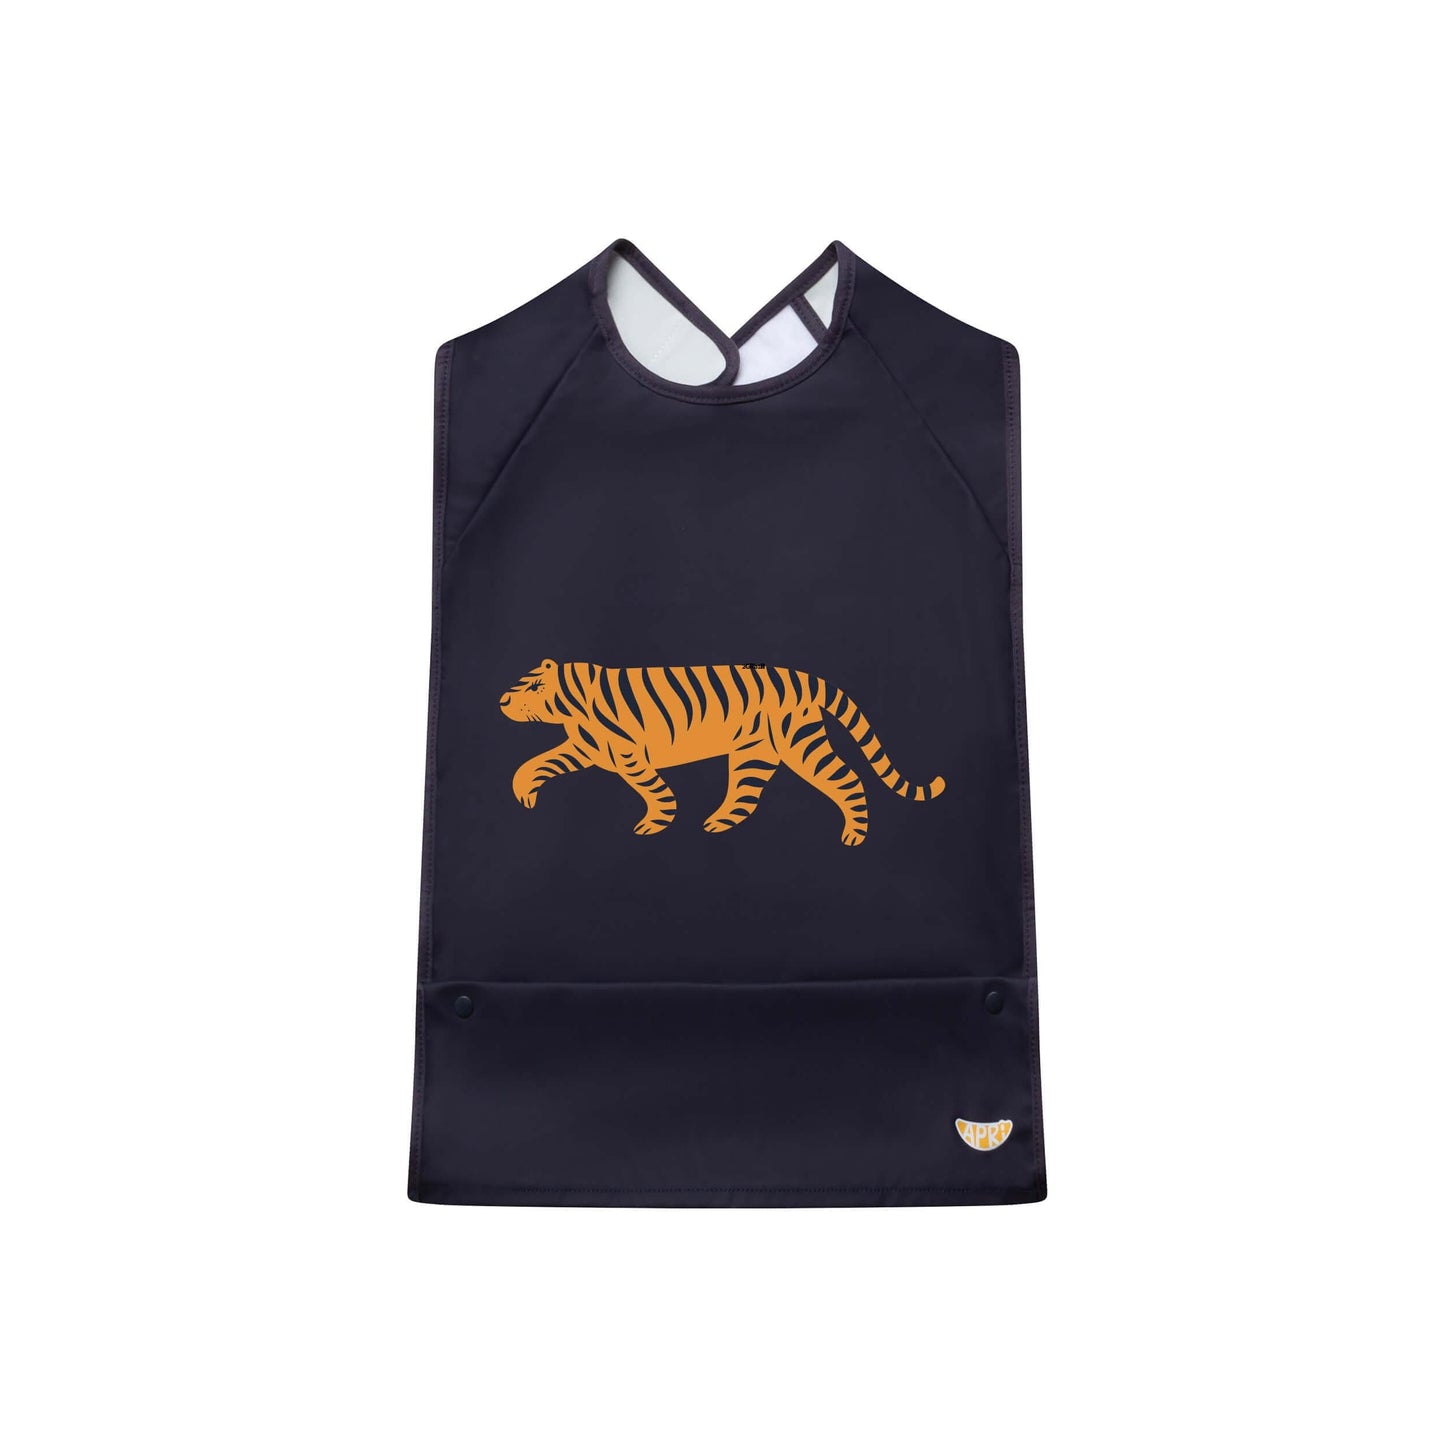 Waterproof  Apri bib for kids, teens and adults with disabilities. Dark blue sleeveless tiger picture with food collection pocket 